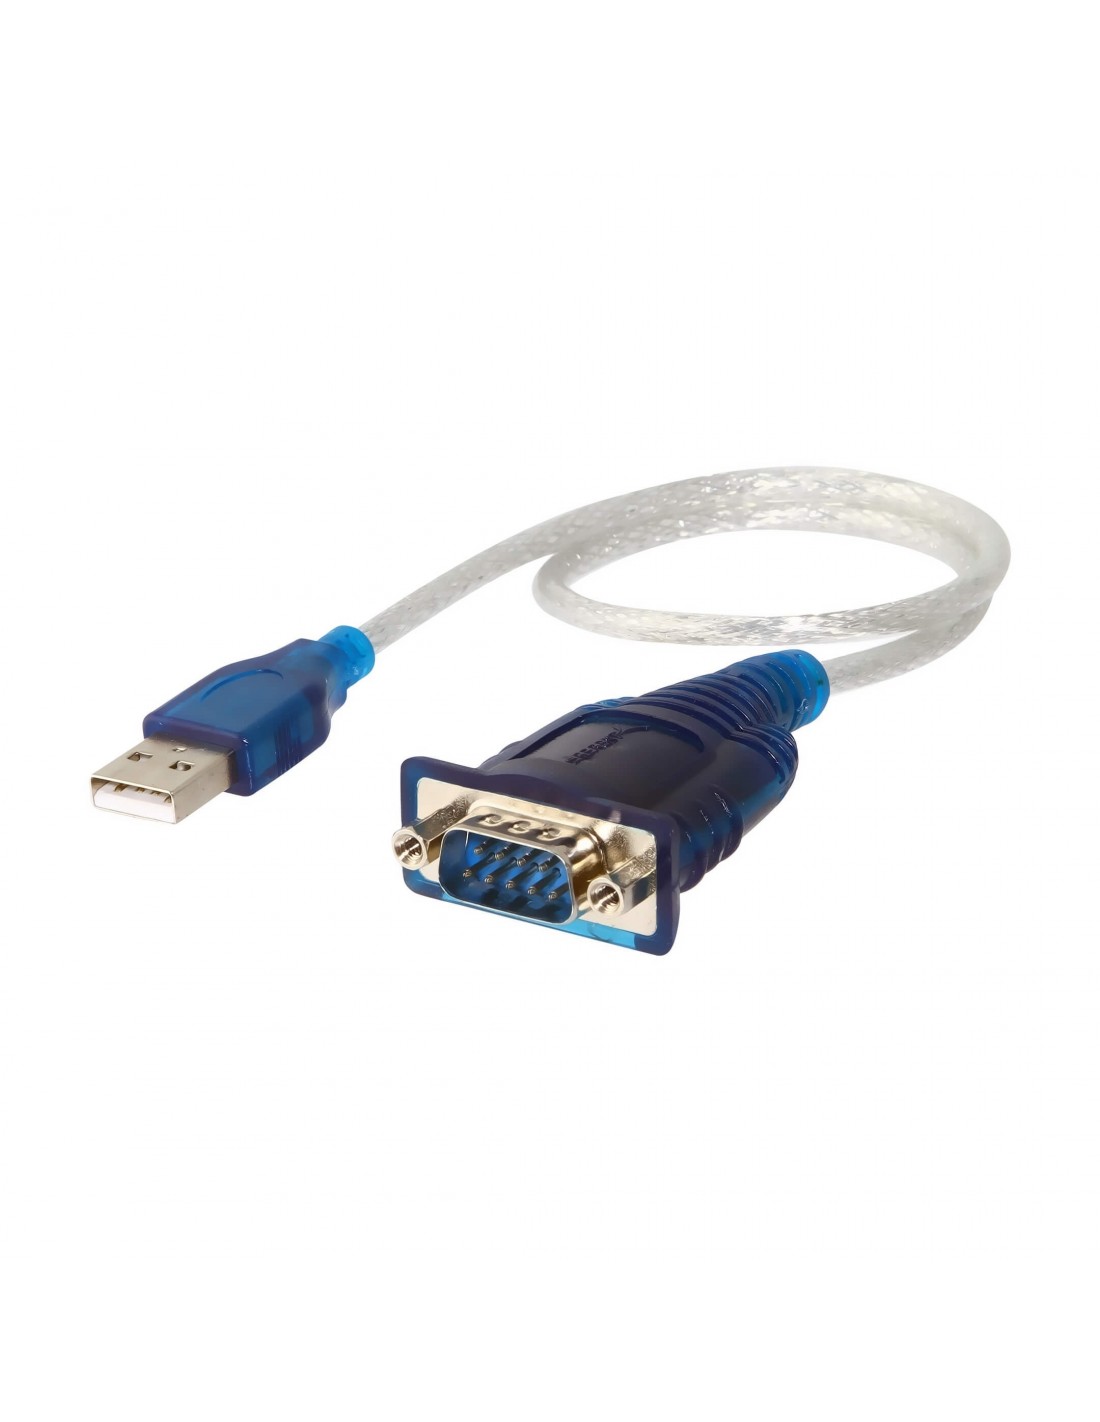 Airlink101 Usb To Serial Driver